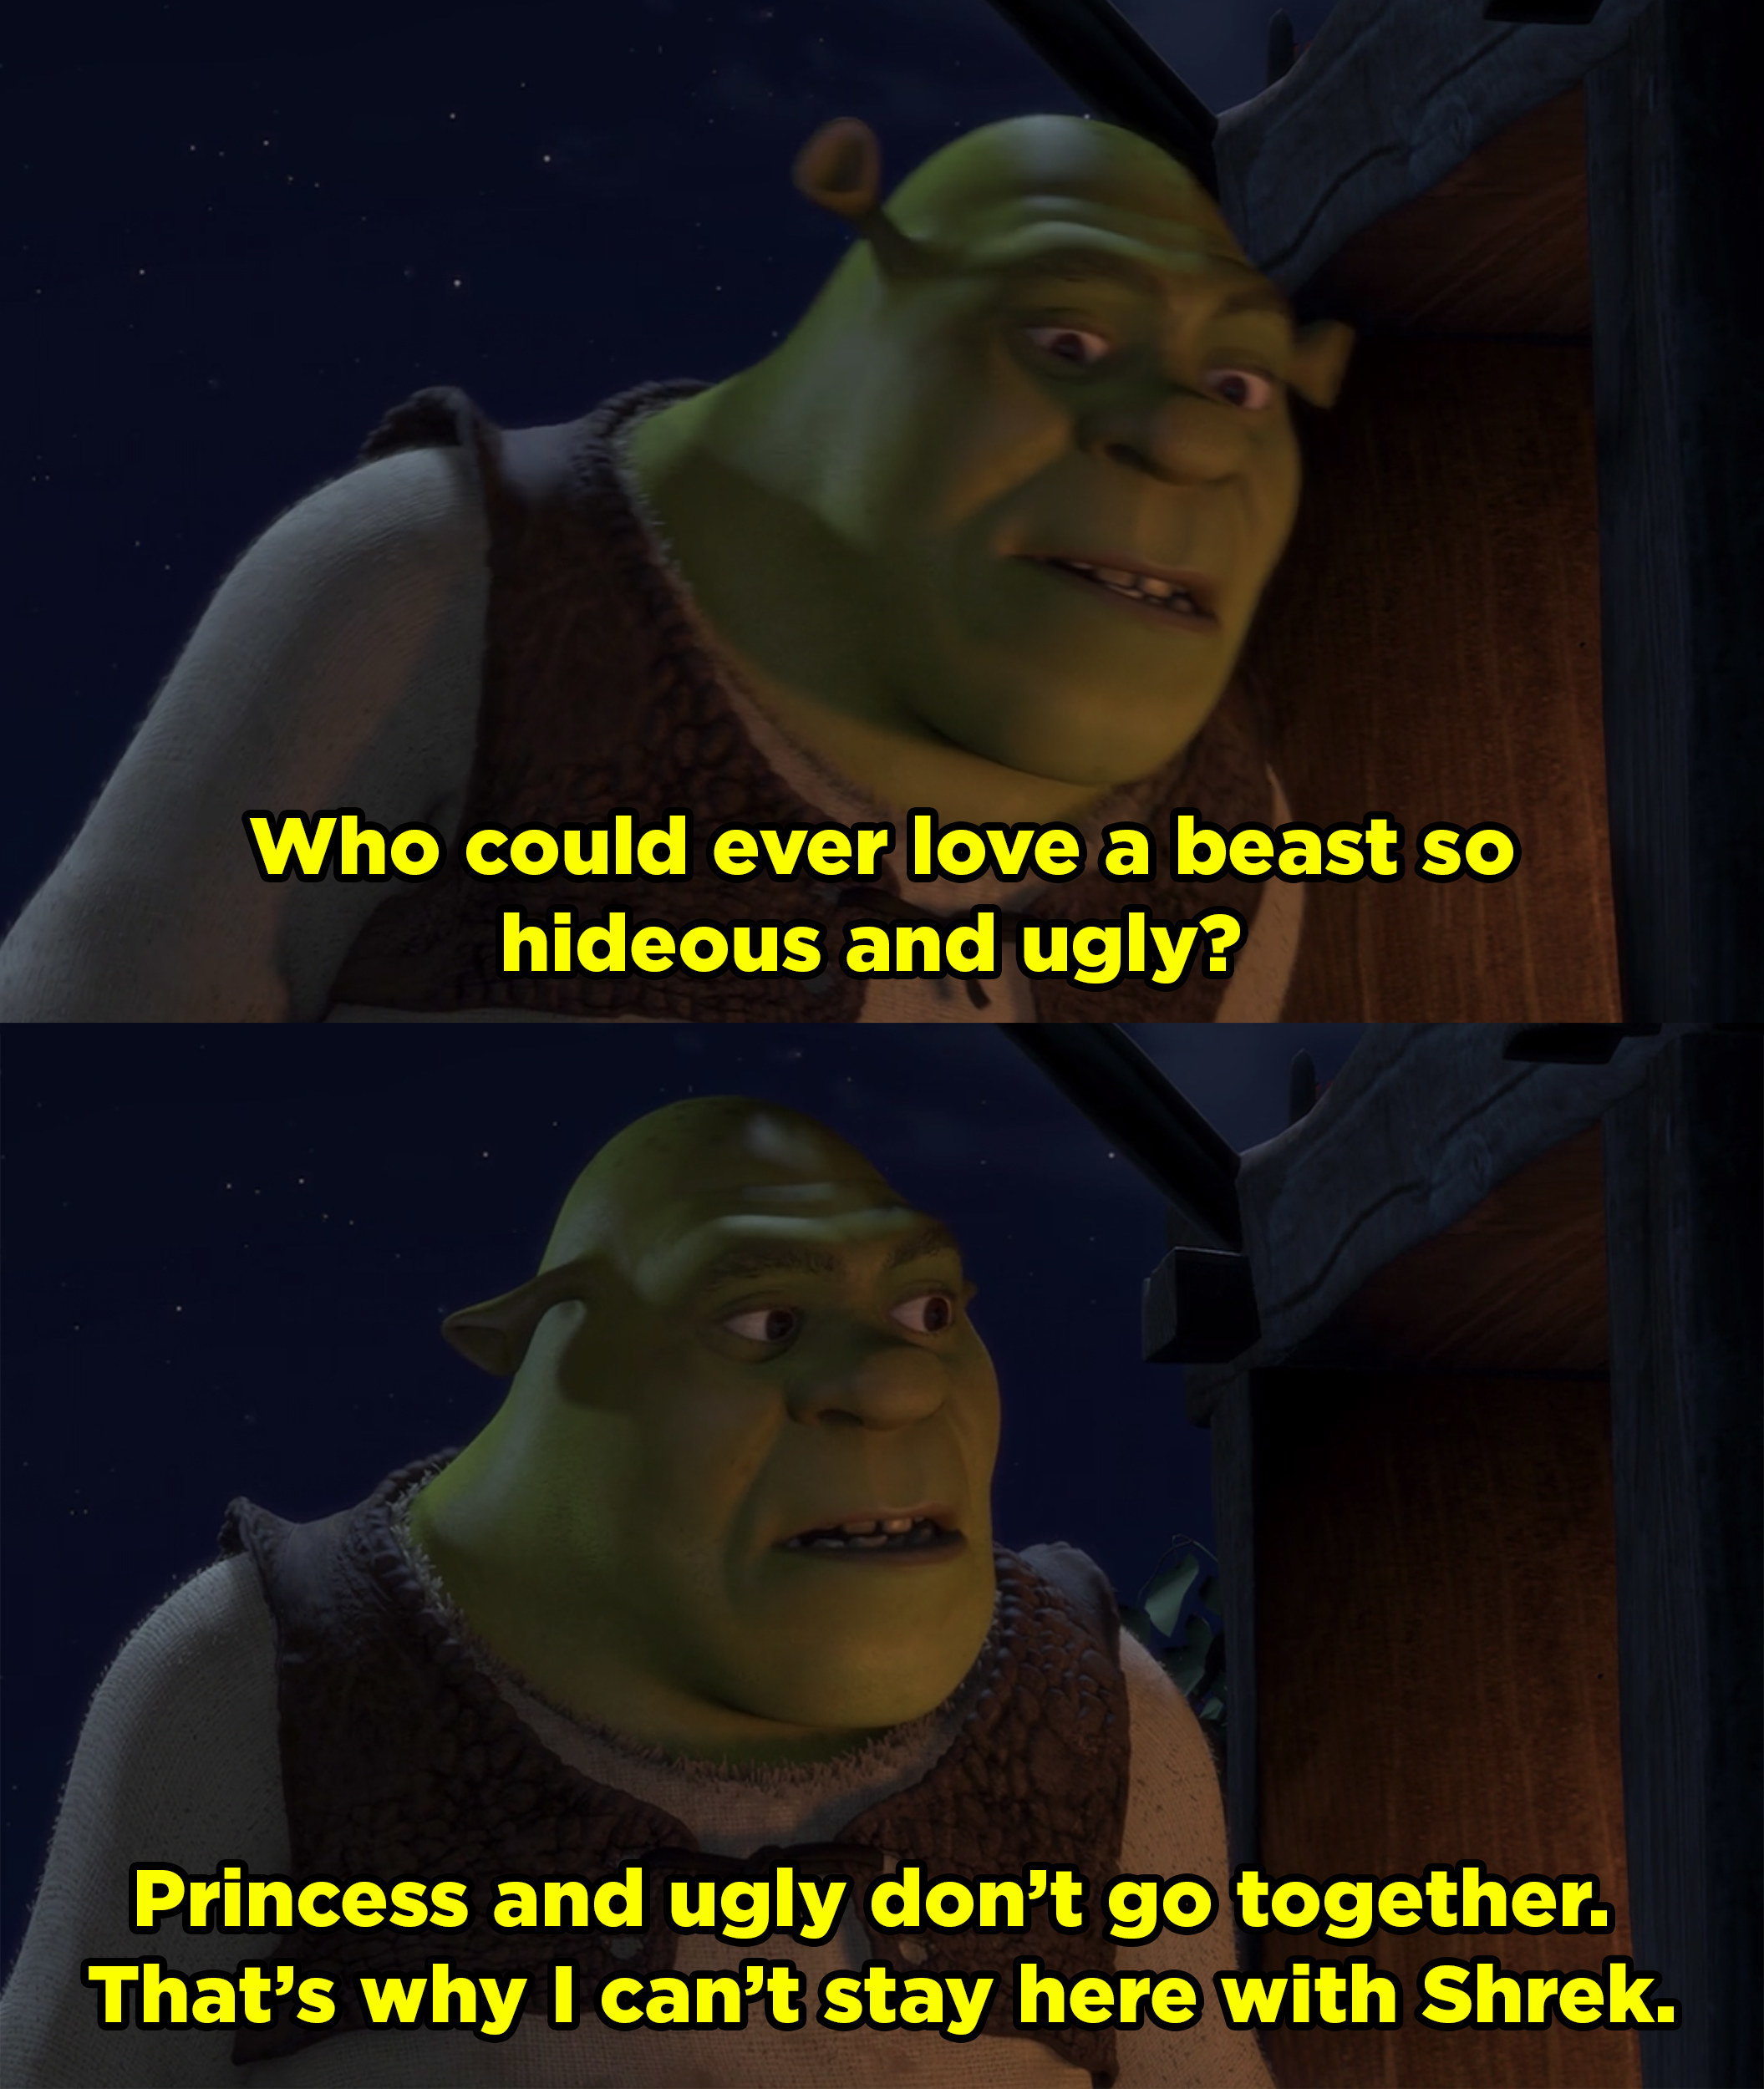 Shrek listens to Fiona tell Donkey that no one could ever love a beast so hideous and ugly, meaning herself.